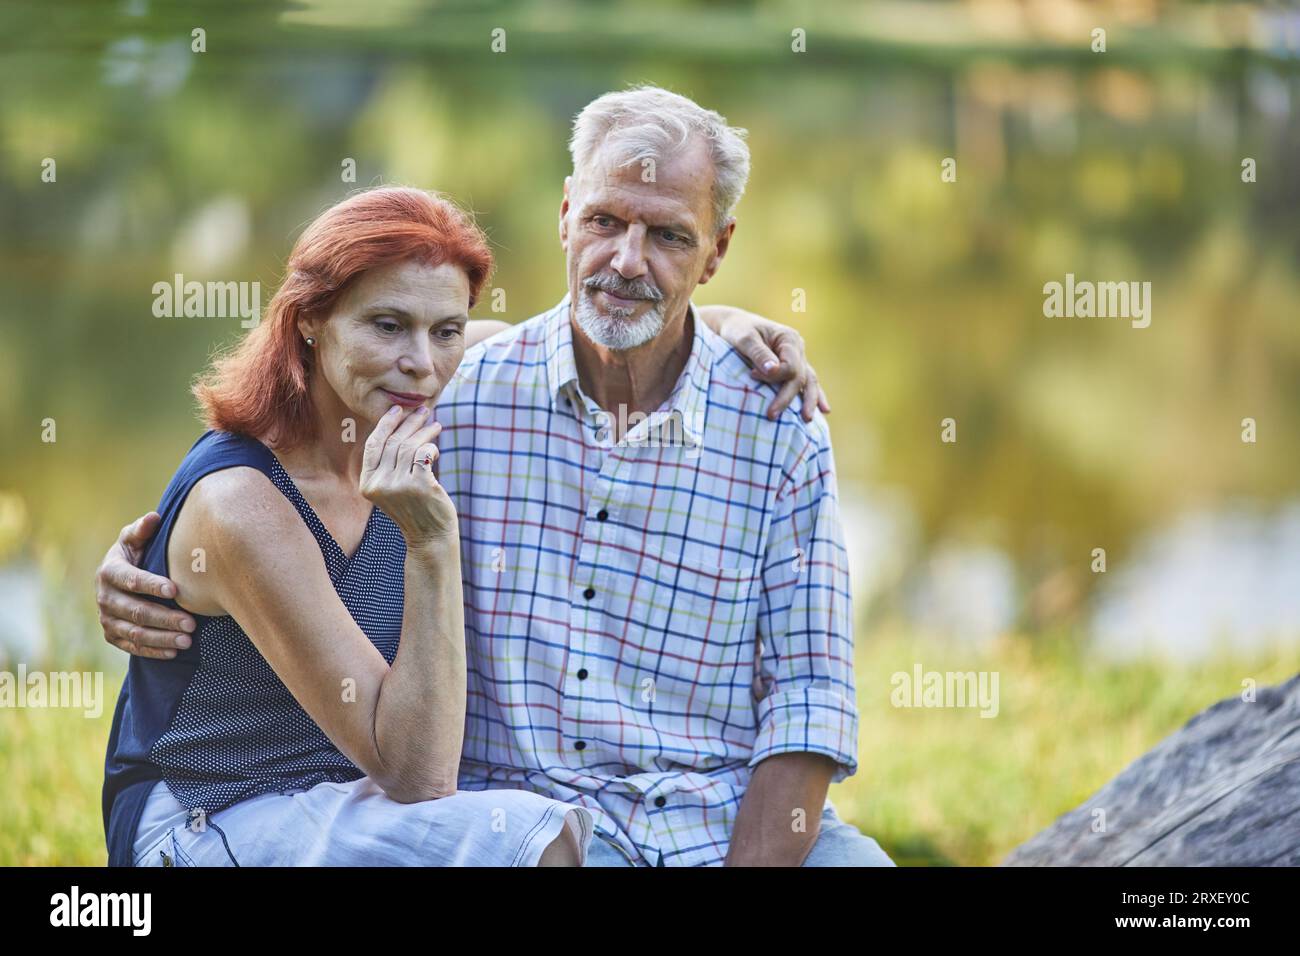 senior thoughtful man and woman against the background of water Stock Photo